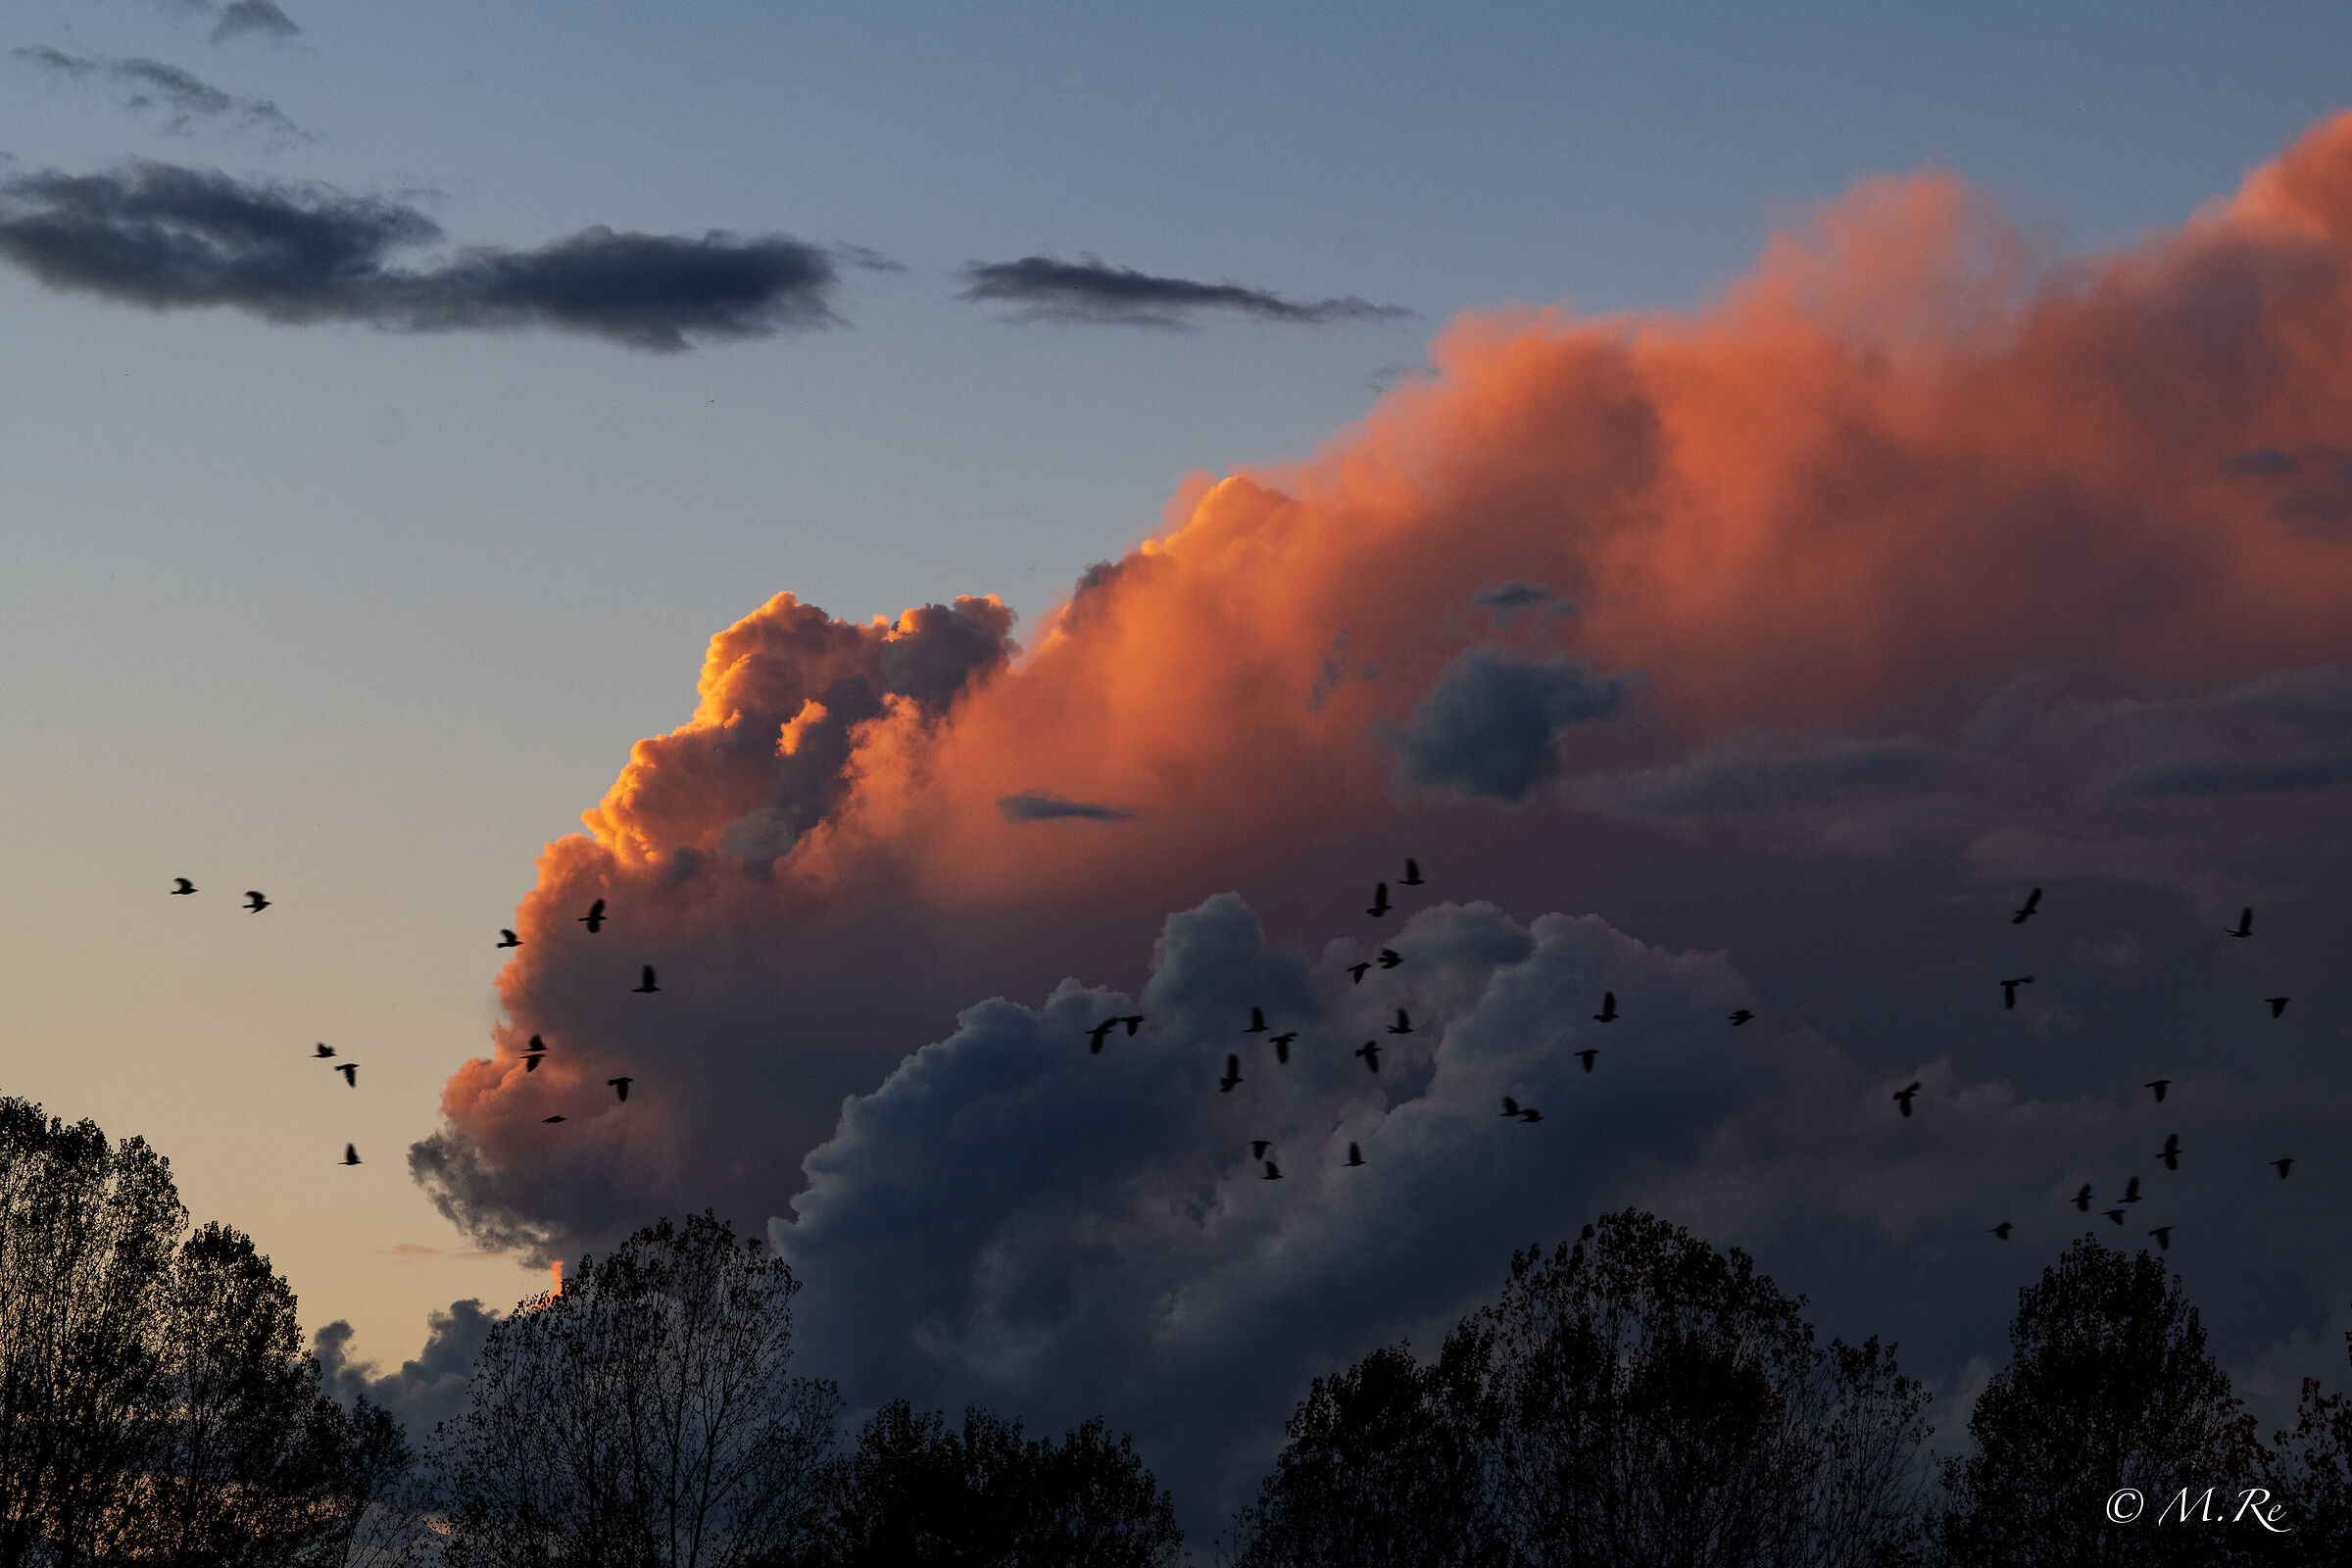 Birds and clouds...